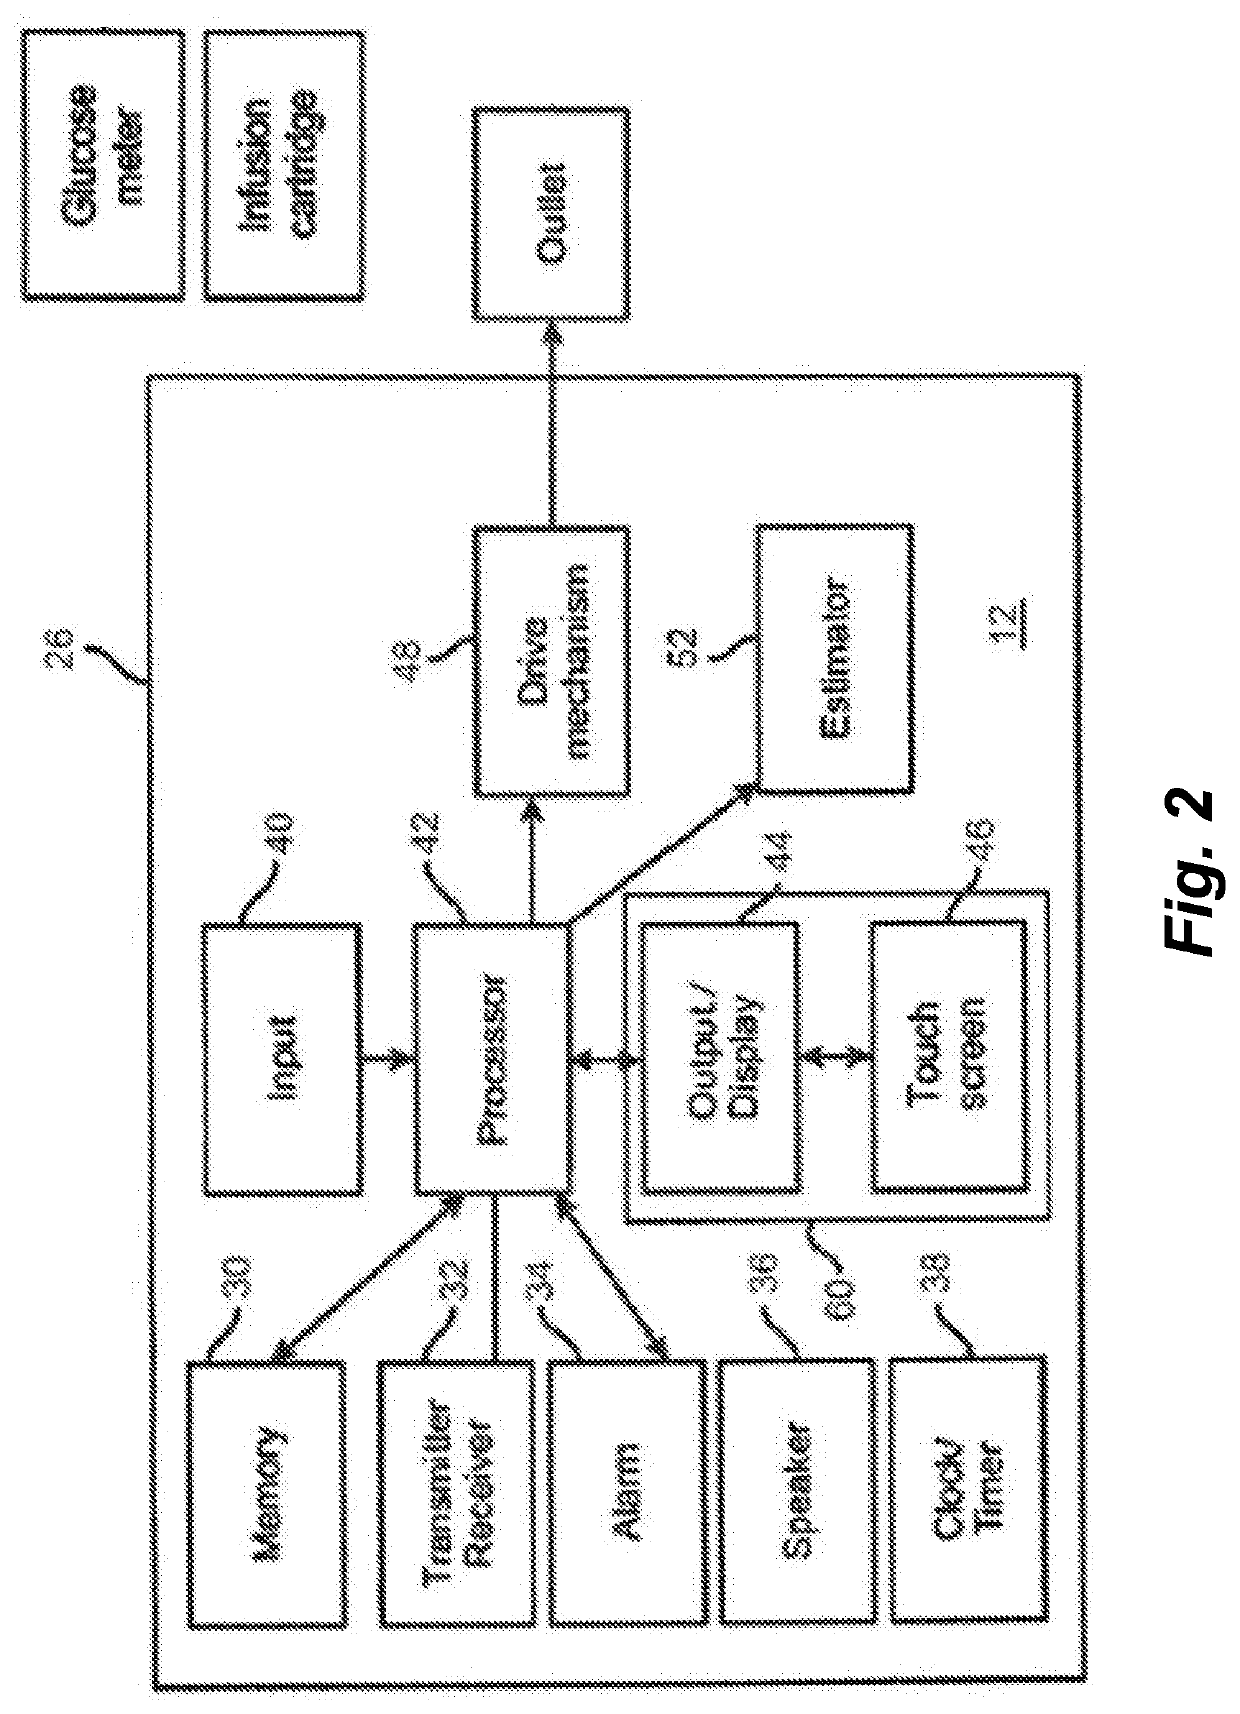 Systems and methods for automated insulin delivery response to inaccurate or missed glucose values